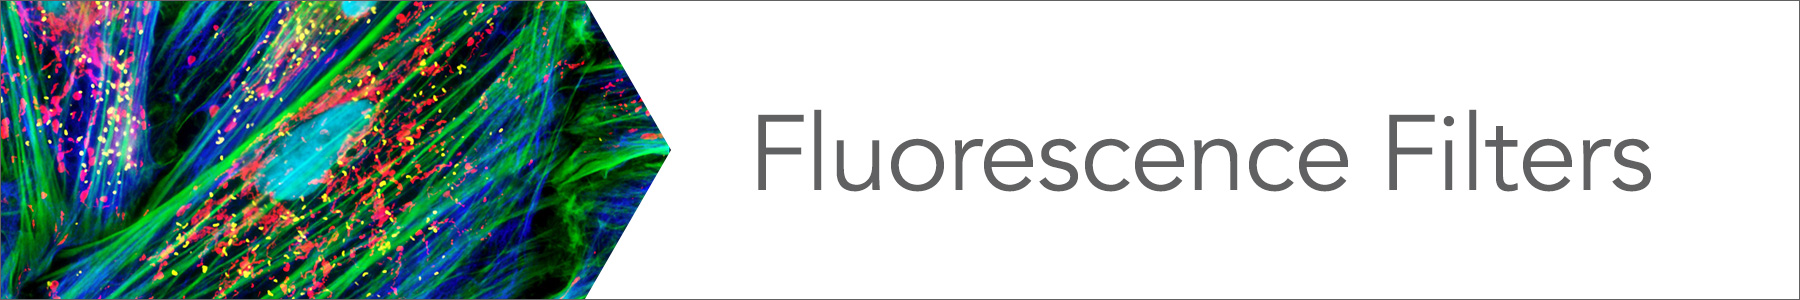 fluorescence filters